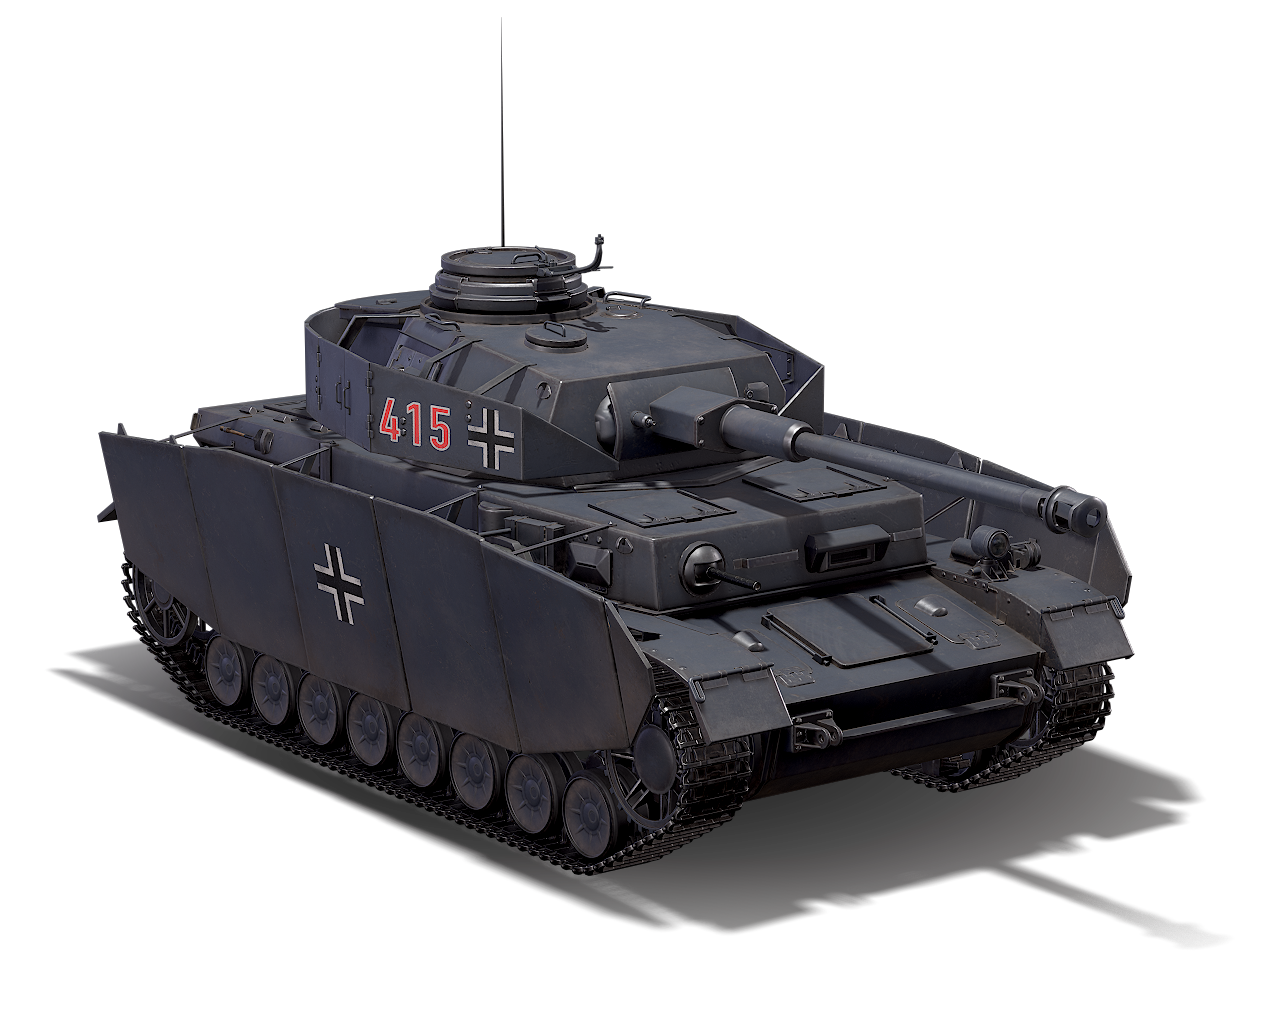 company of heroes 2 puma or panzer 4